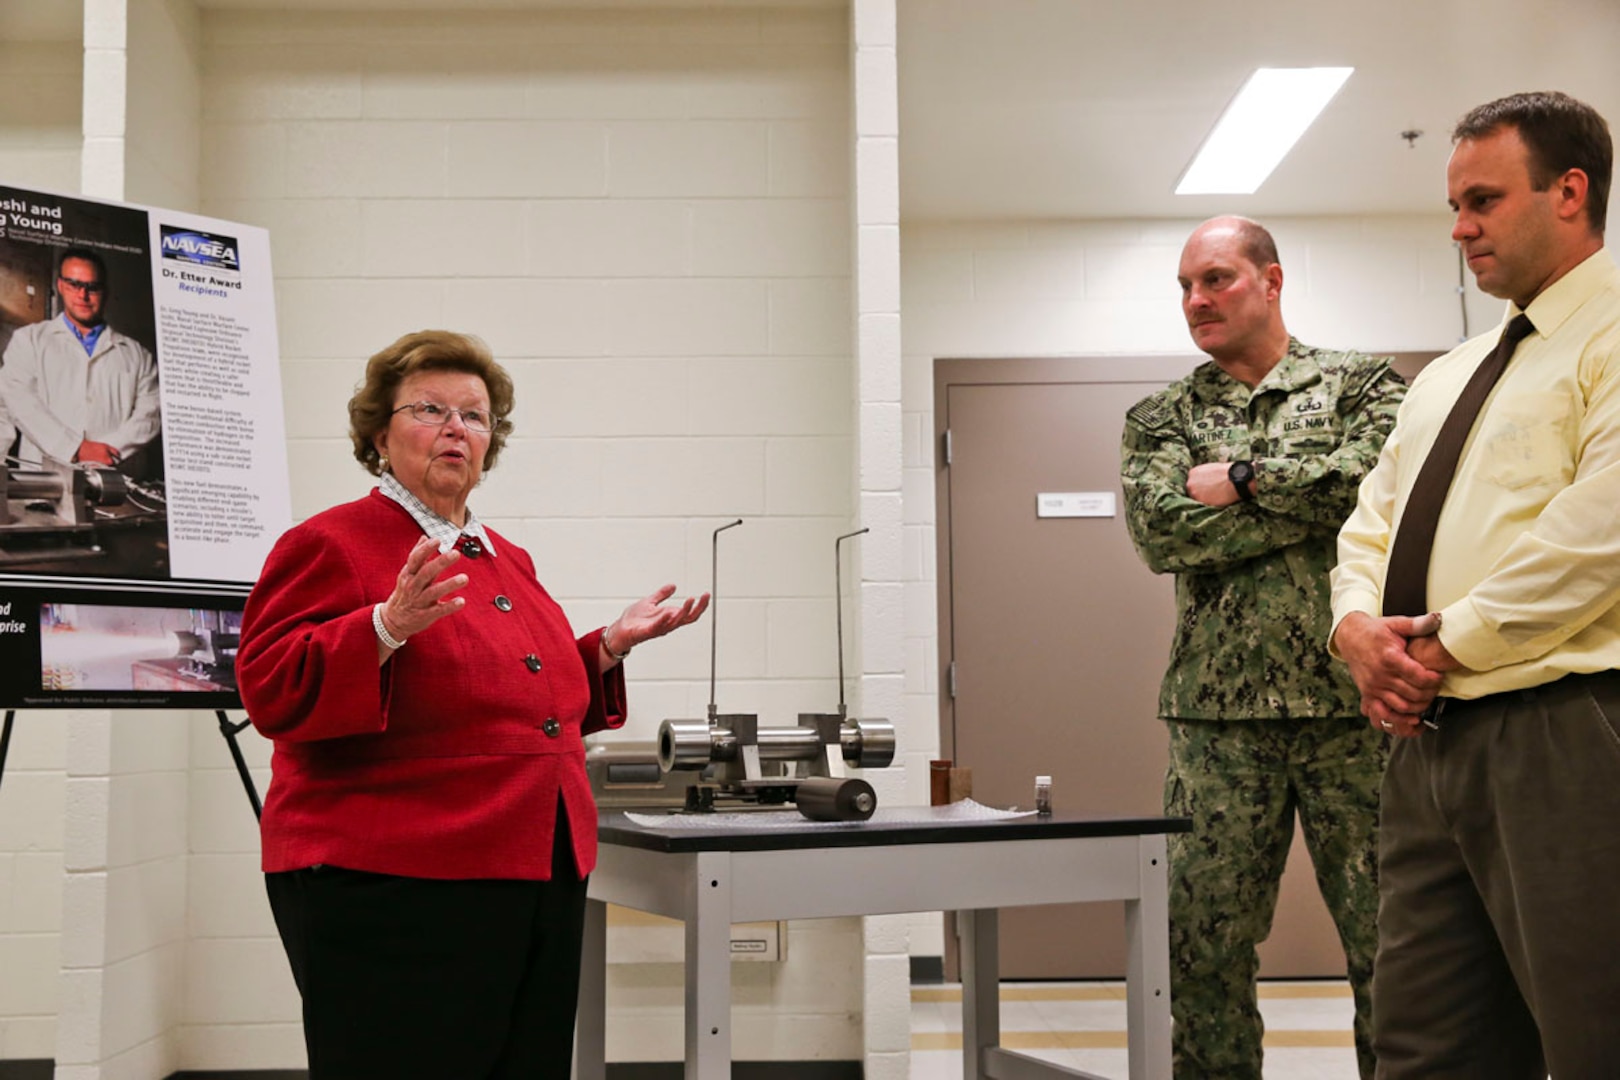 U.S. Senator Barbara A. Mikulski (D-Md.) learns about the command's Hybrid Rocket Propulsion efforts from propulsion engineer and program lead Dr. Greg Young, shown with Commanding Officer Capt. Vincent Martinez, during her visit to Naval Surface Warfare Center Indian Head Explosive Ordnance Disposal Technology Division (NSWC IHEODTD), Oct. 5. 